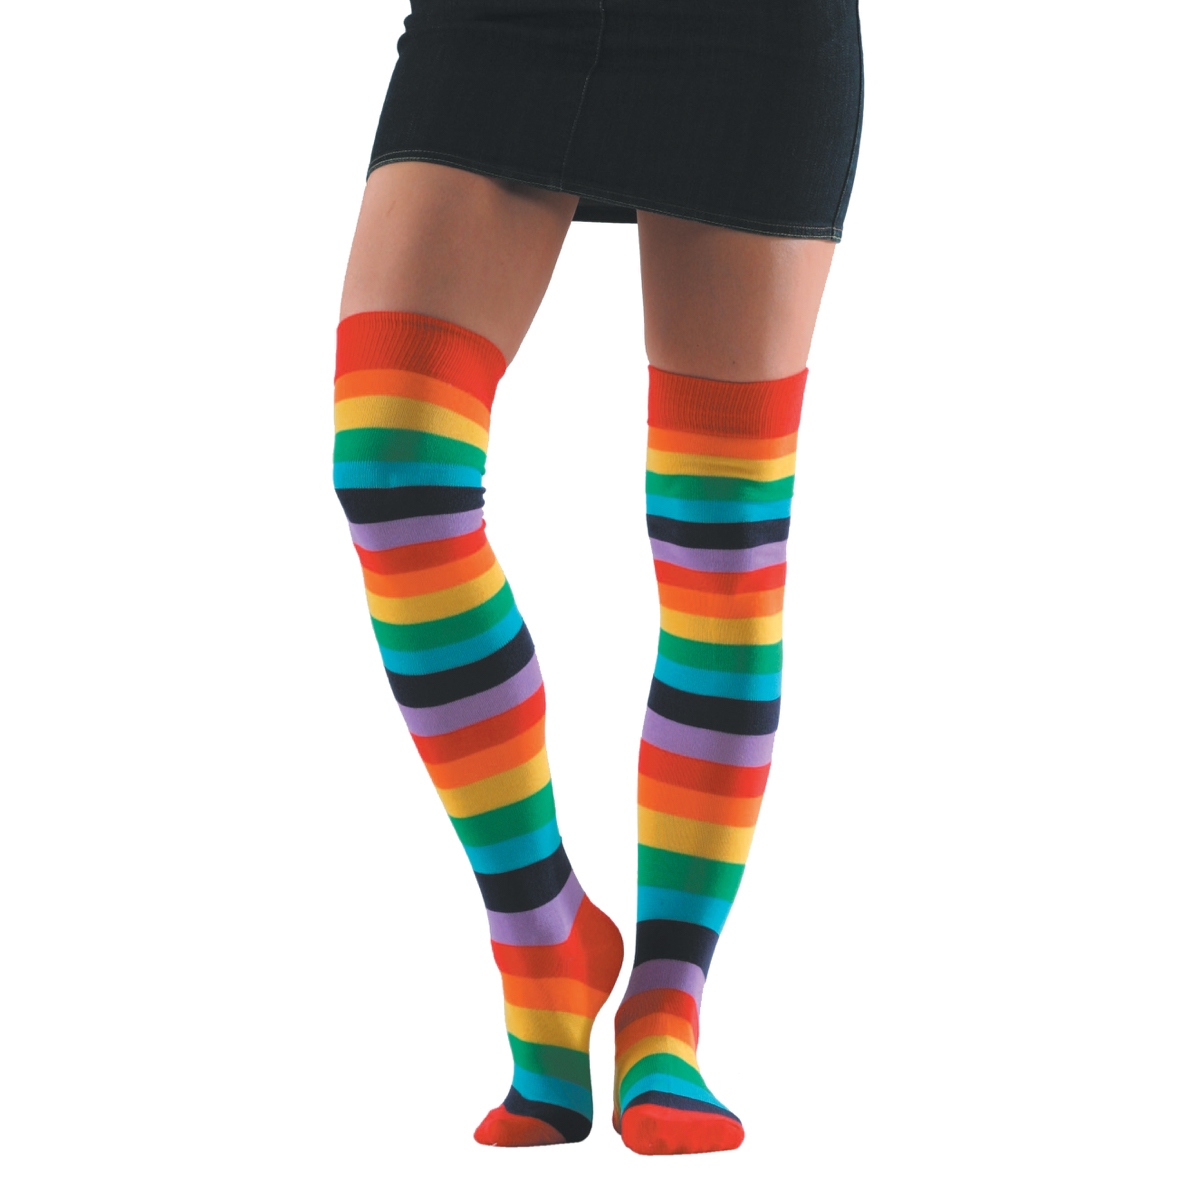 Shop Women's Over-the-Knee Socks and Tights